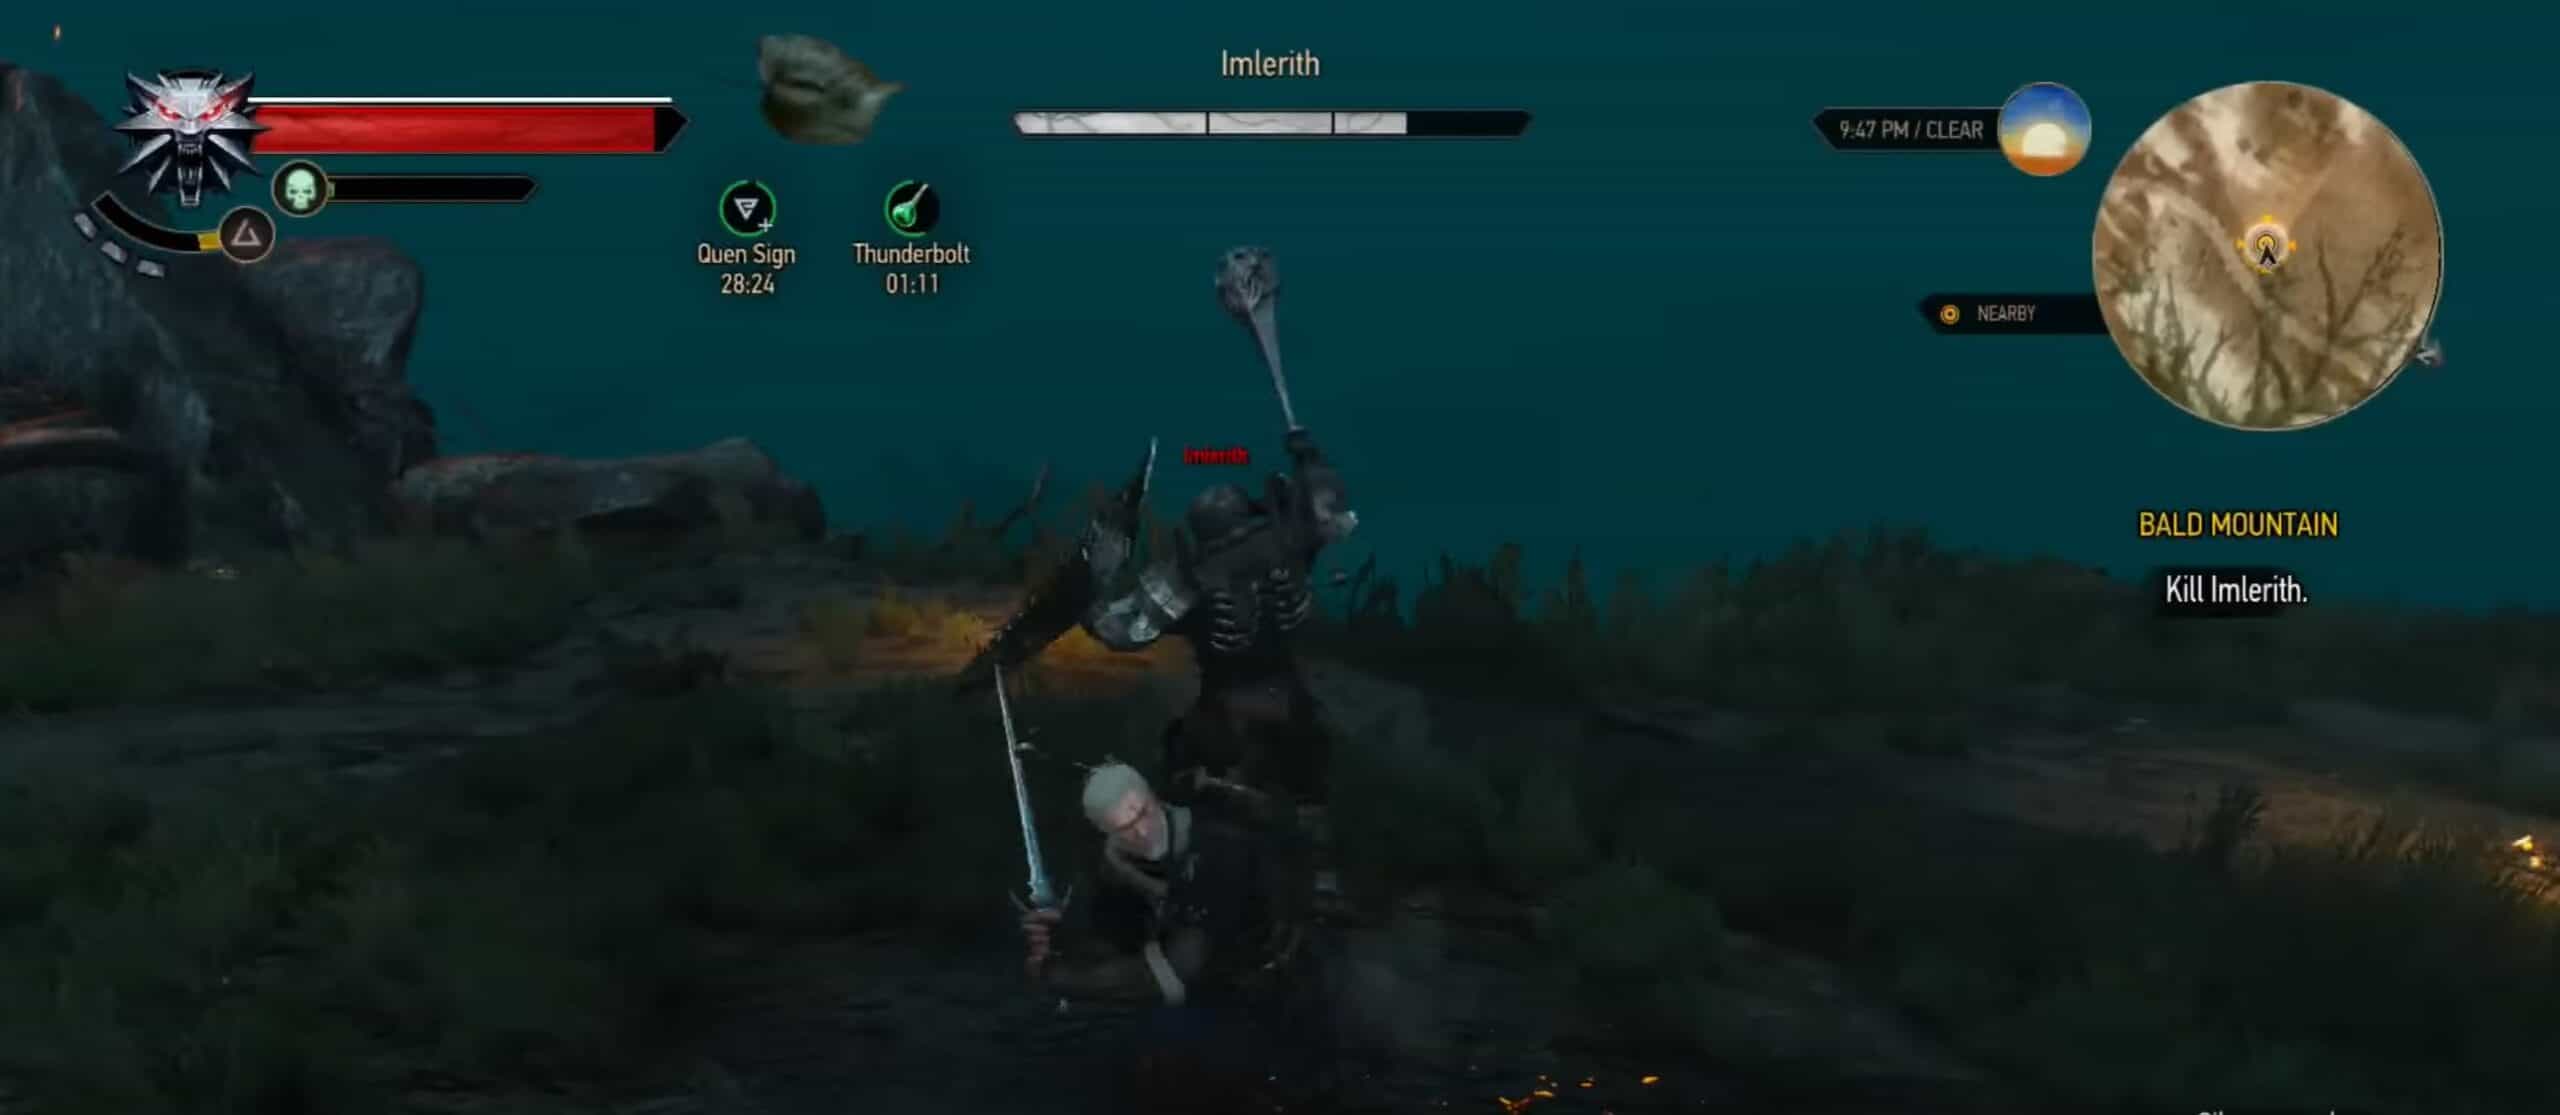 The Witcher 3 Bald Mountain Imleright fight